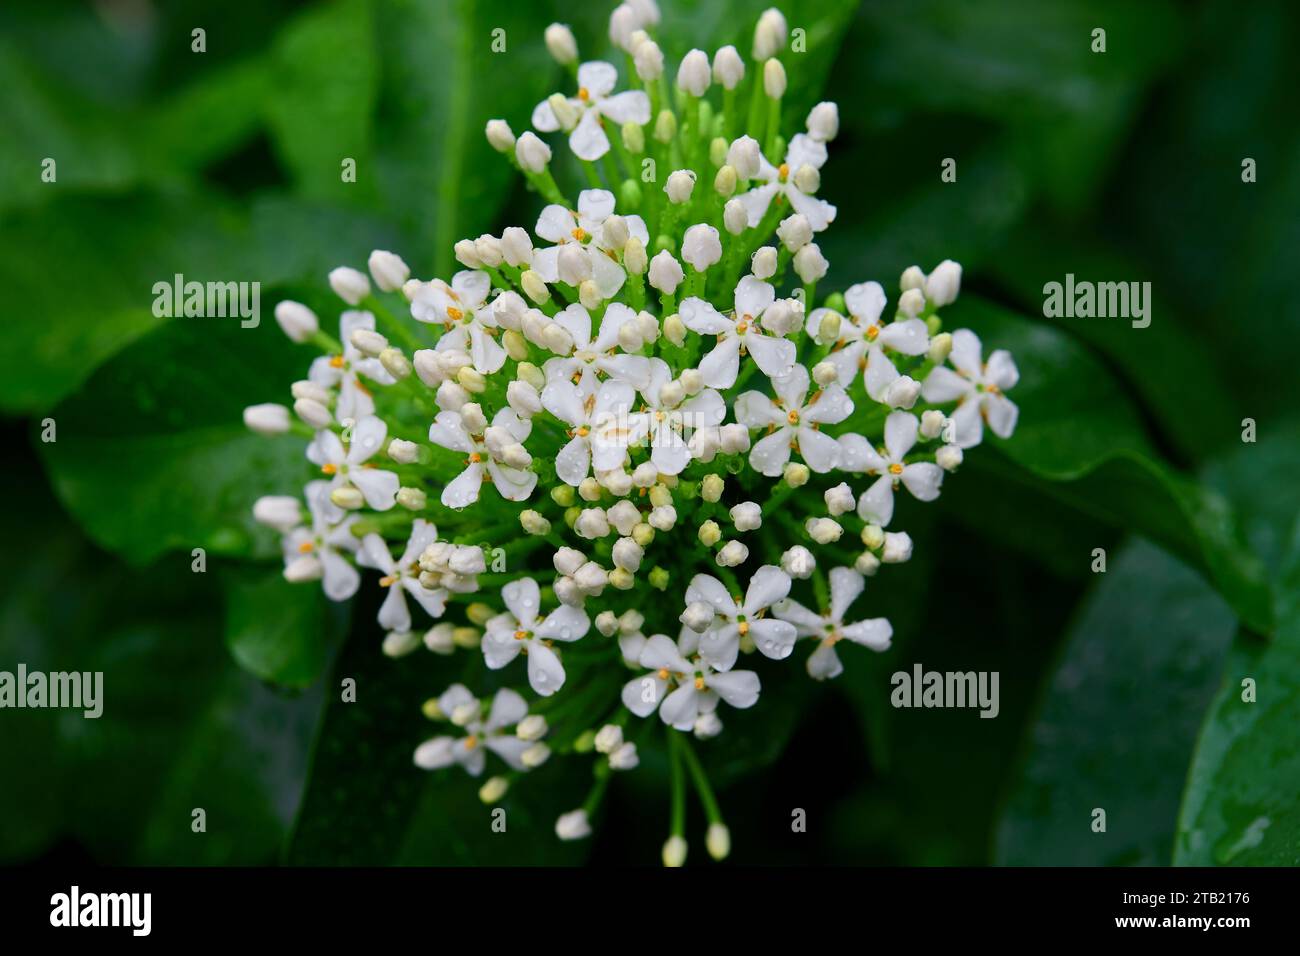 Close-up view of raindrops on white flower Stock Photo